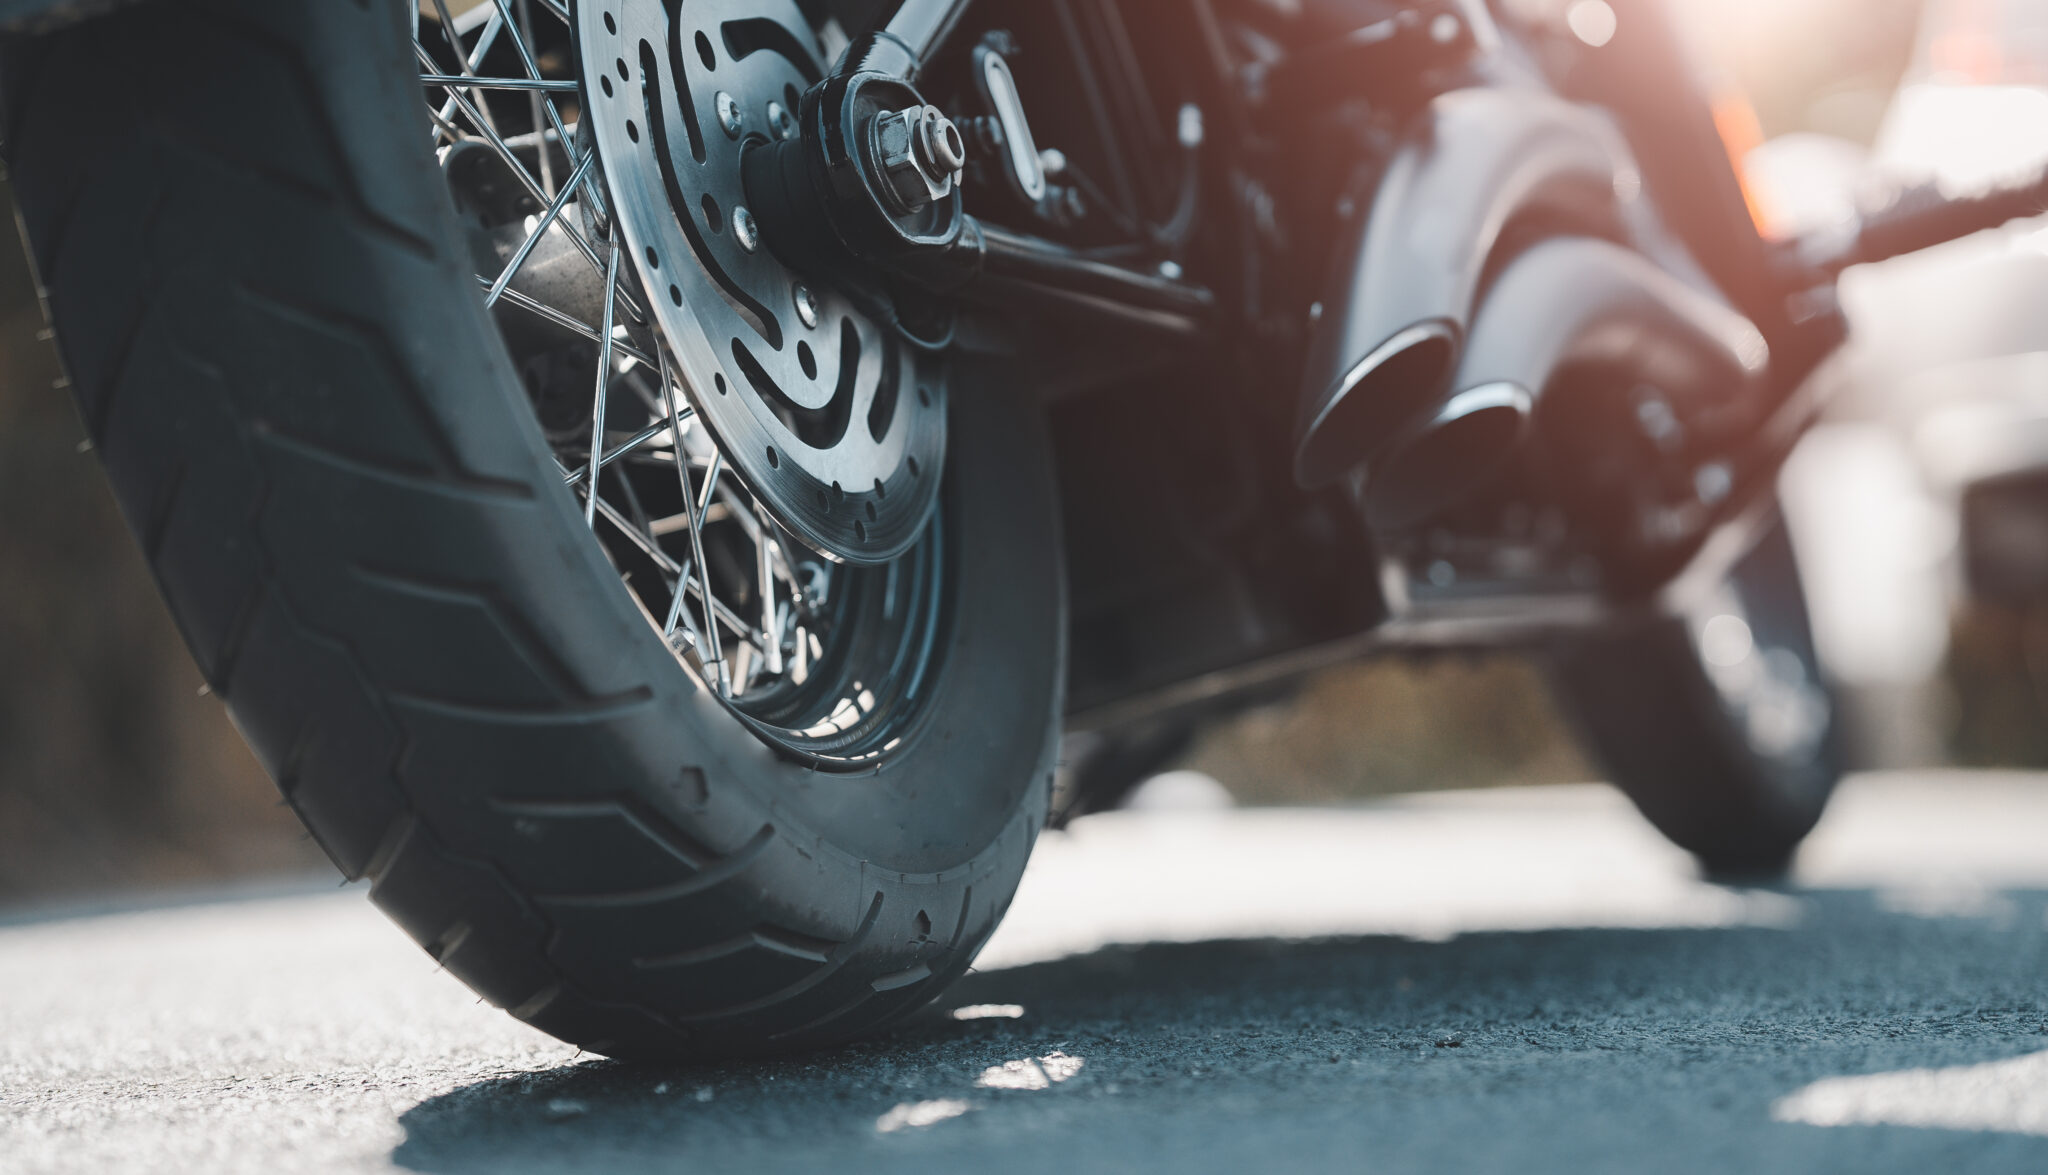 Case Study: rod ends and pre-assembled solutions for the motorcycle industry